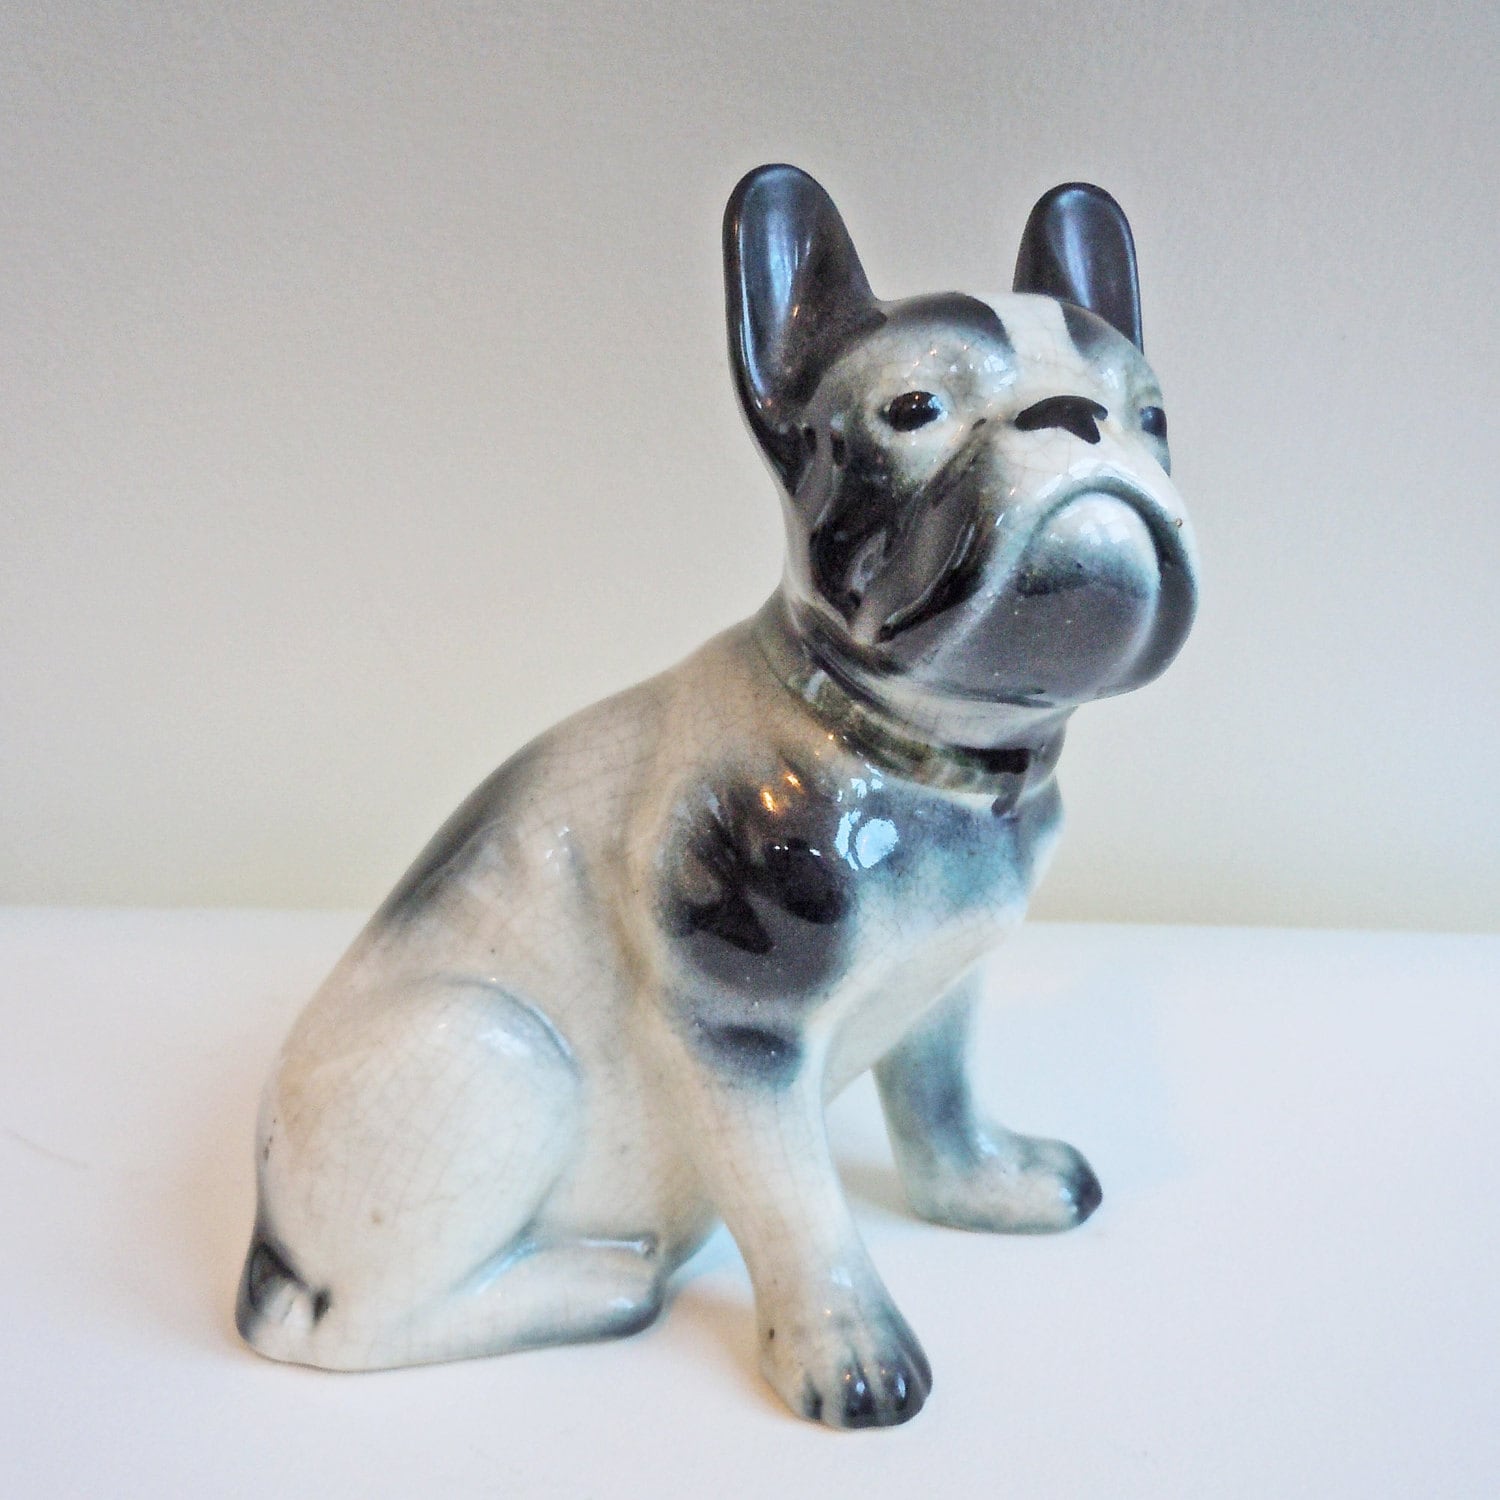 Vintage 1940s French Bulldog Figurine to benefit French